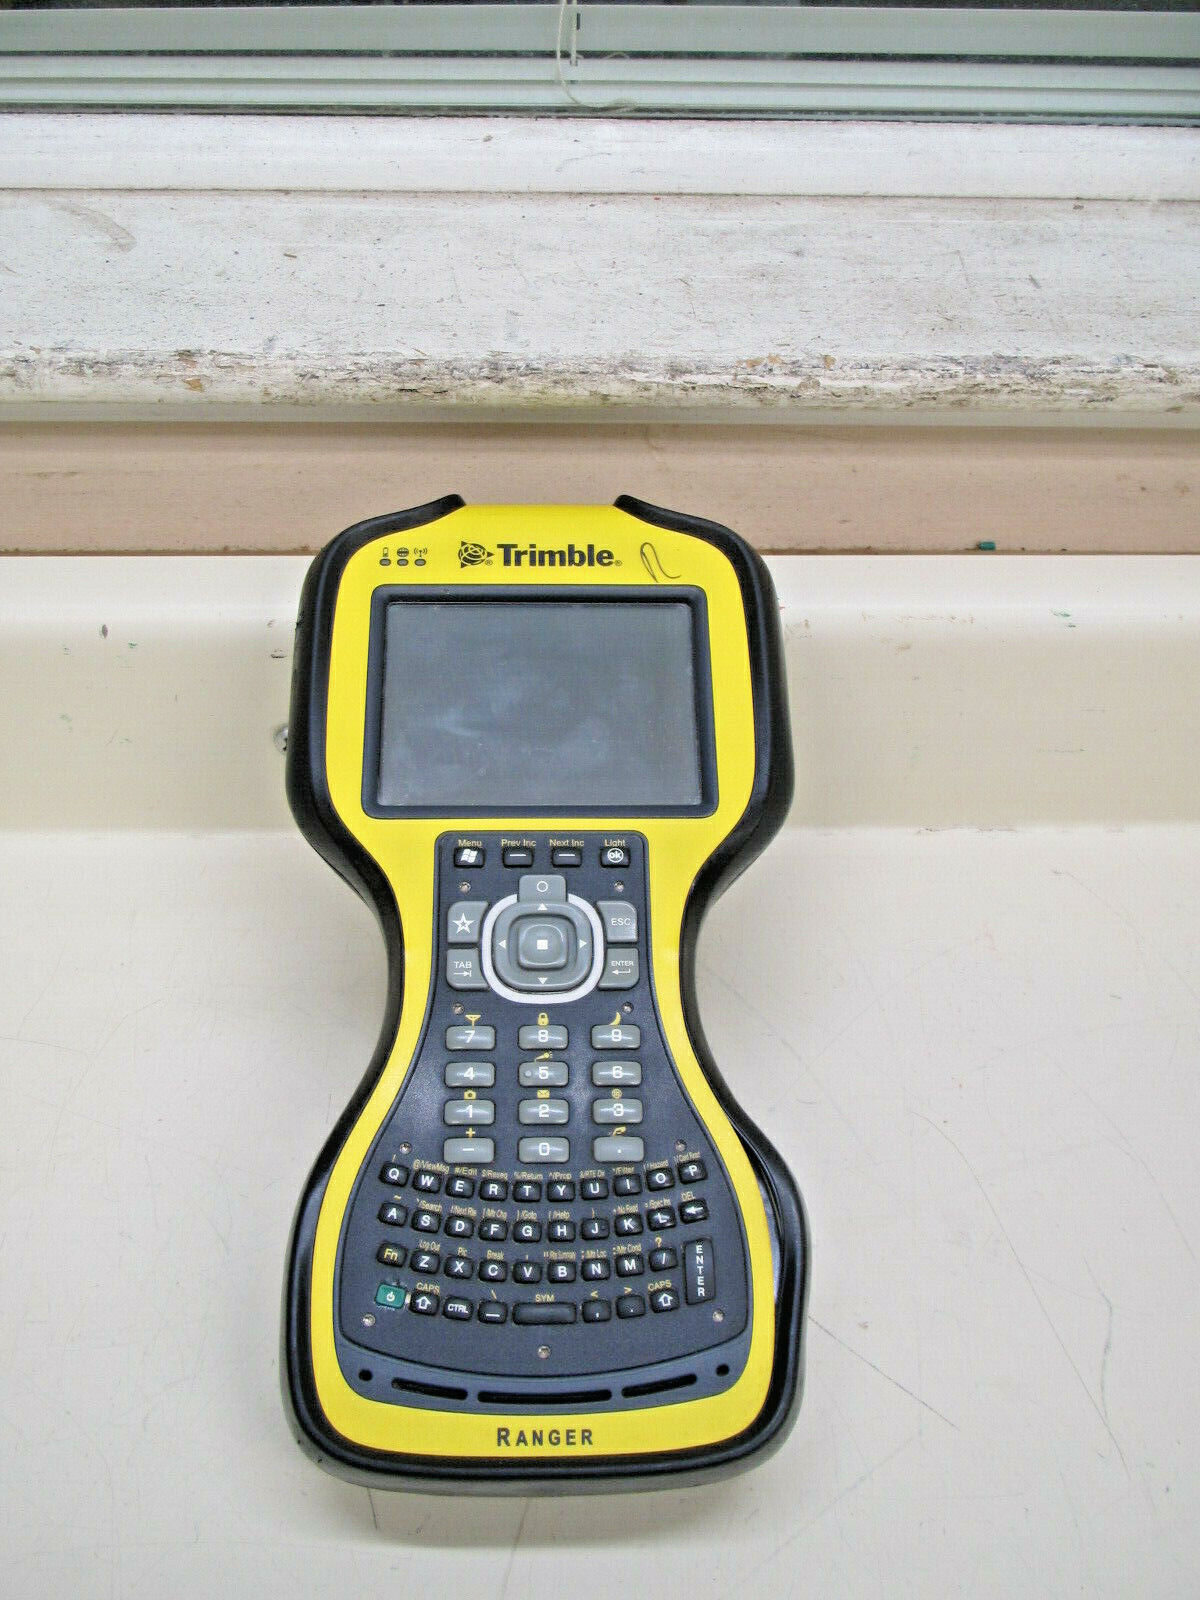 Trimble Ranger TSC3 Field Controller Handheld GPS Data Collector Used #2